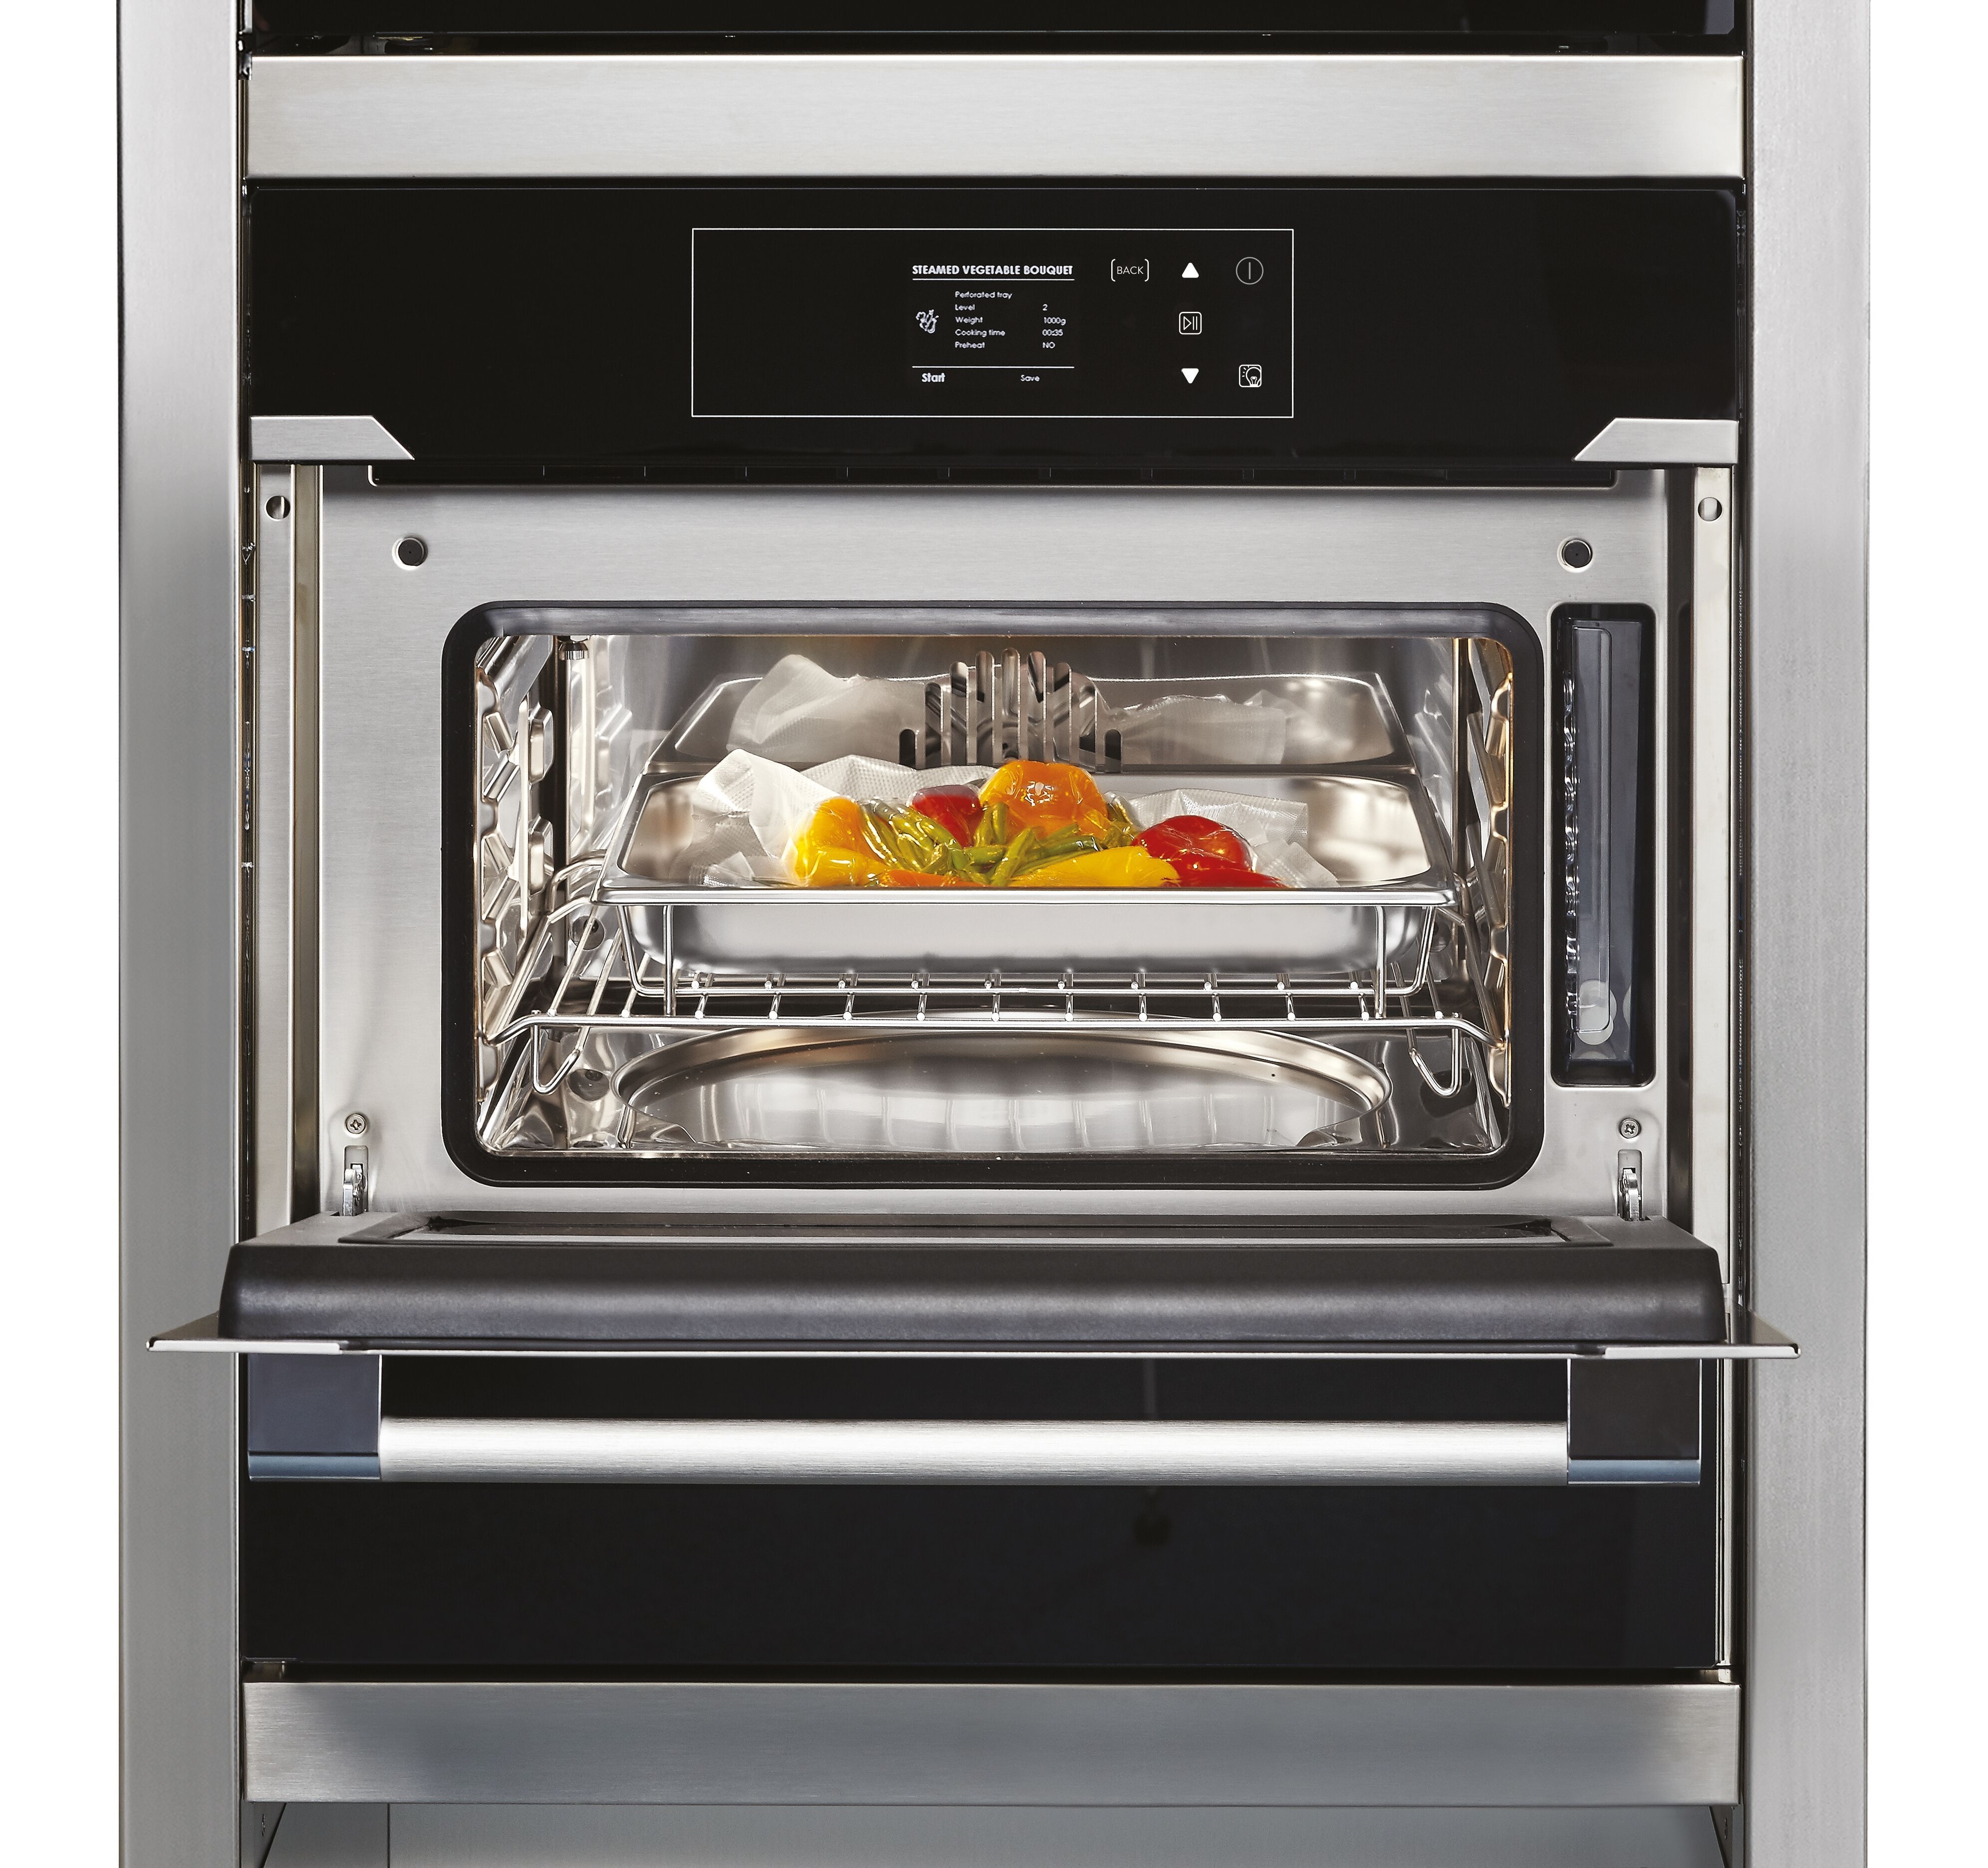 Hoover Vogue Premium HSO450SV 45cm Steam Oven – Black Glass and Steel